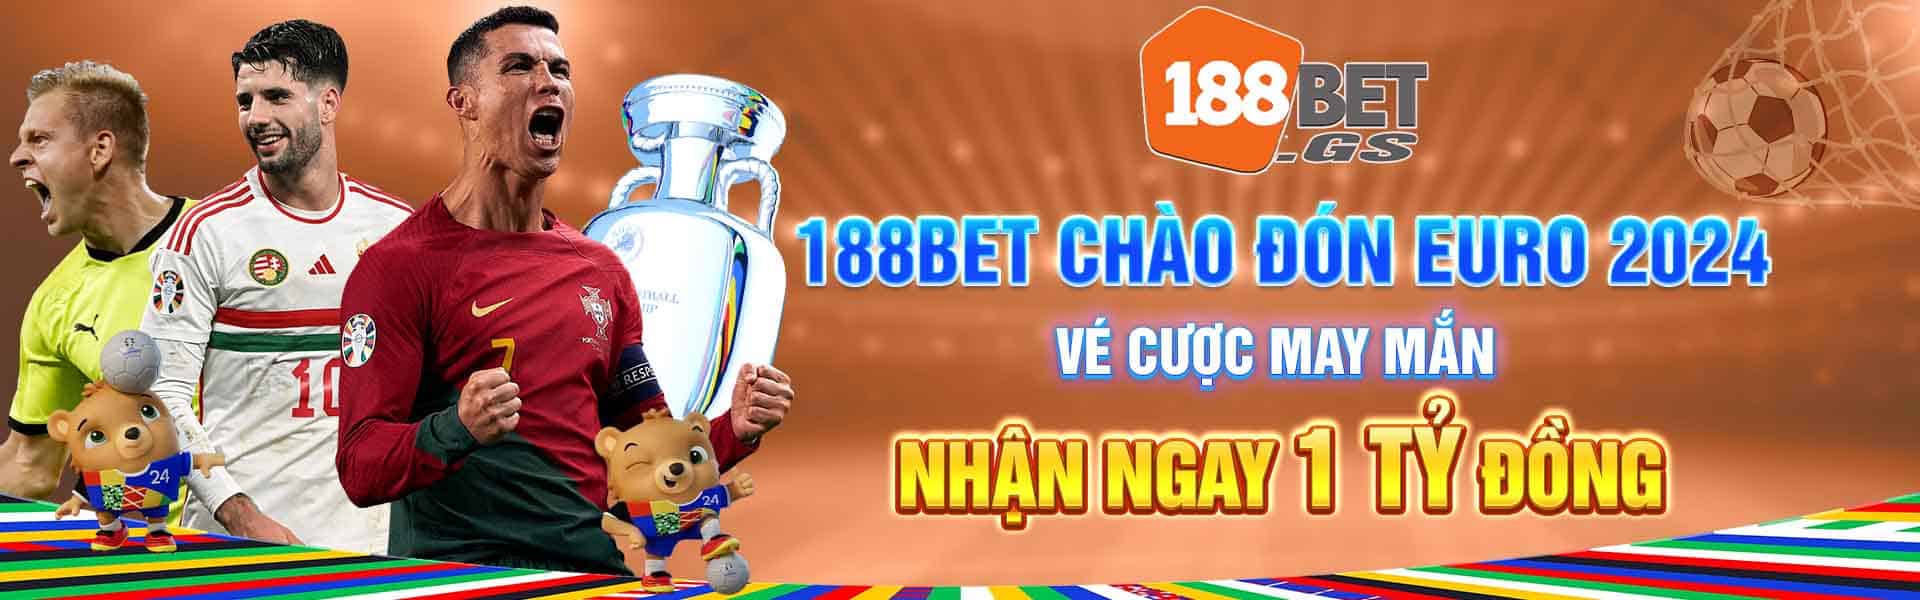 188bet-chao-don-euro-2024-ve-cuoc-may-man-nhan-ngay-1-ty-dong